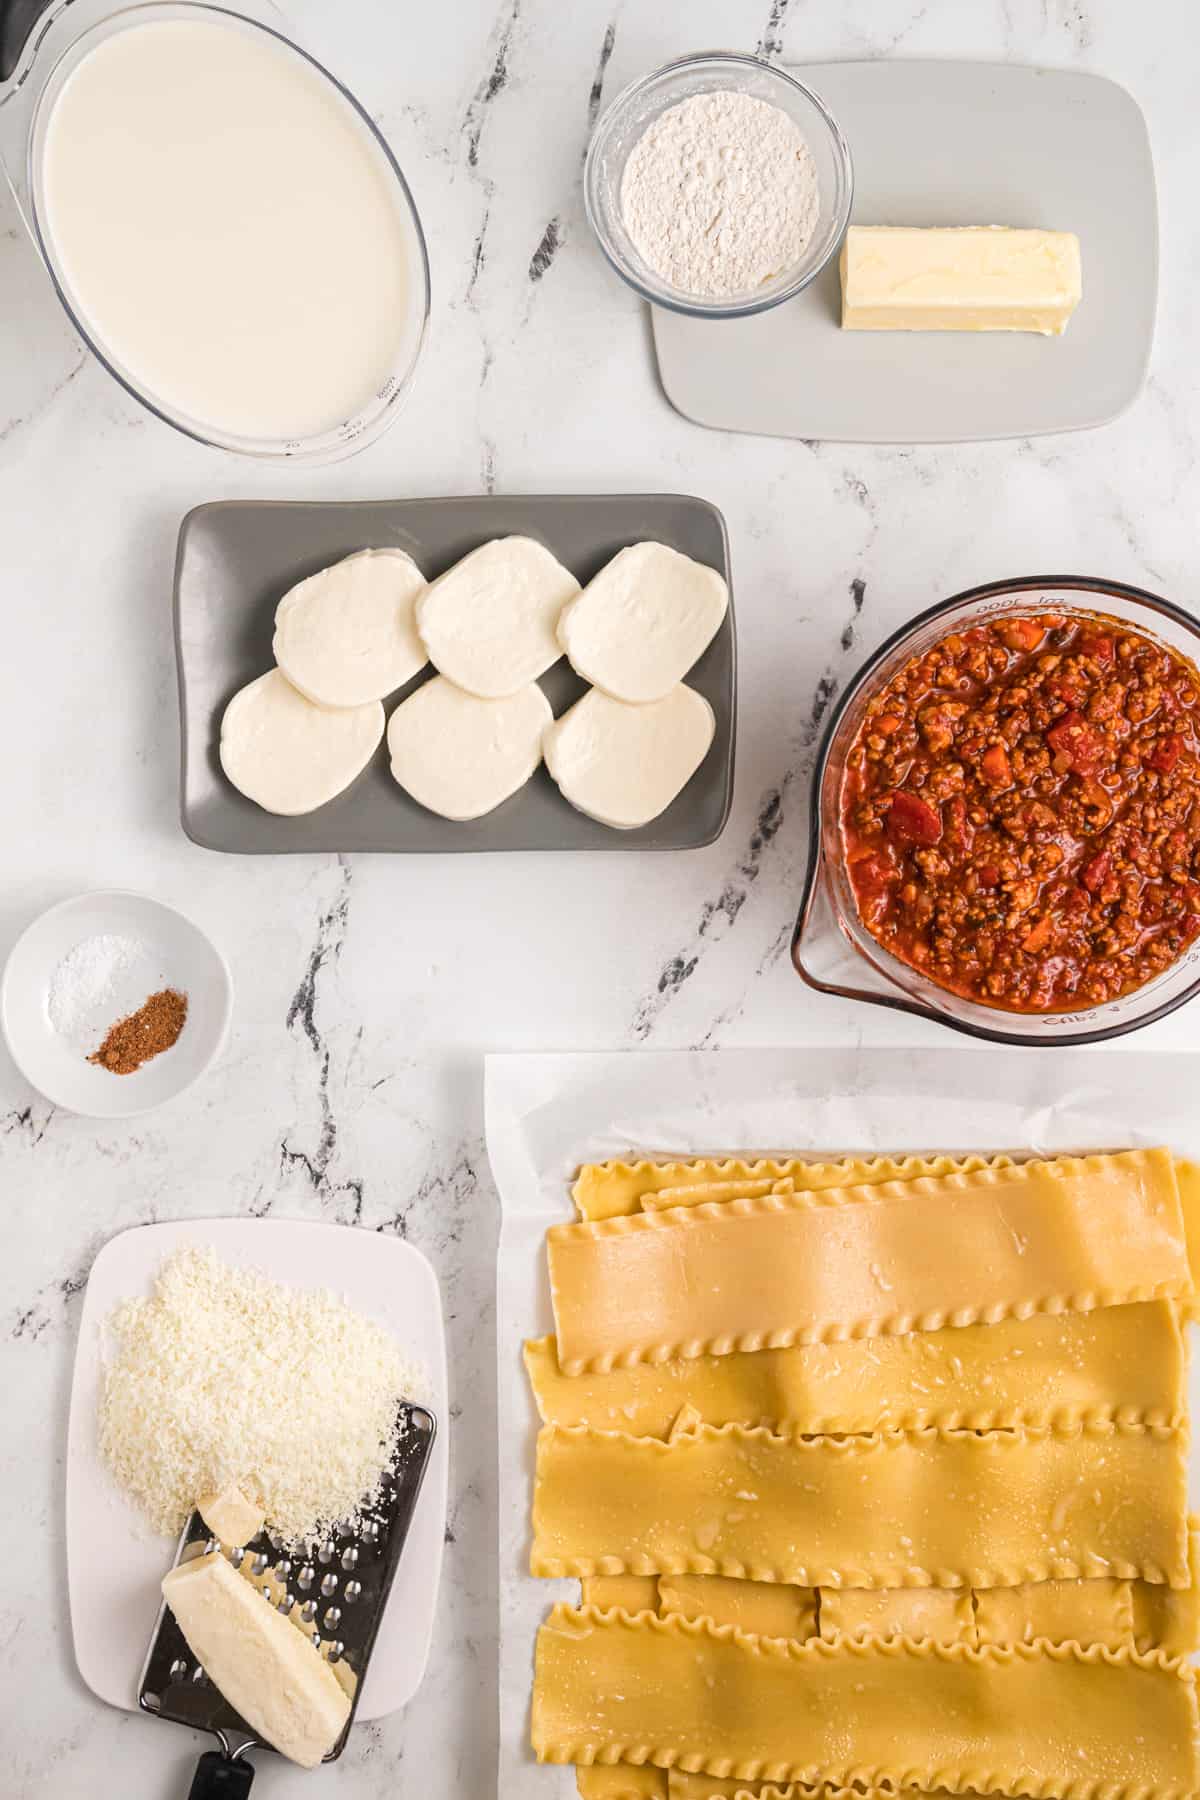 The ingredients for lasagna bolognese are placed on a white countertop.